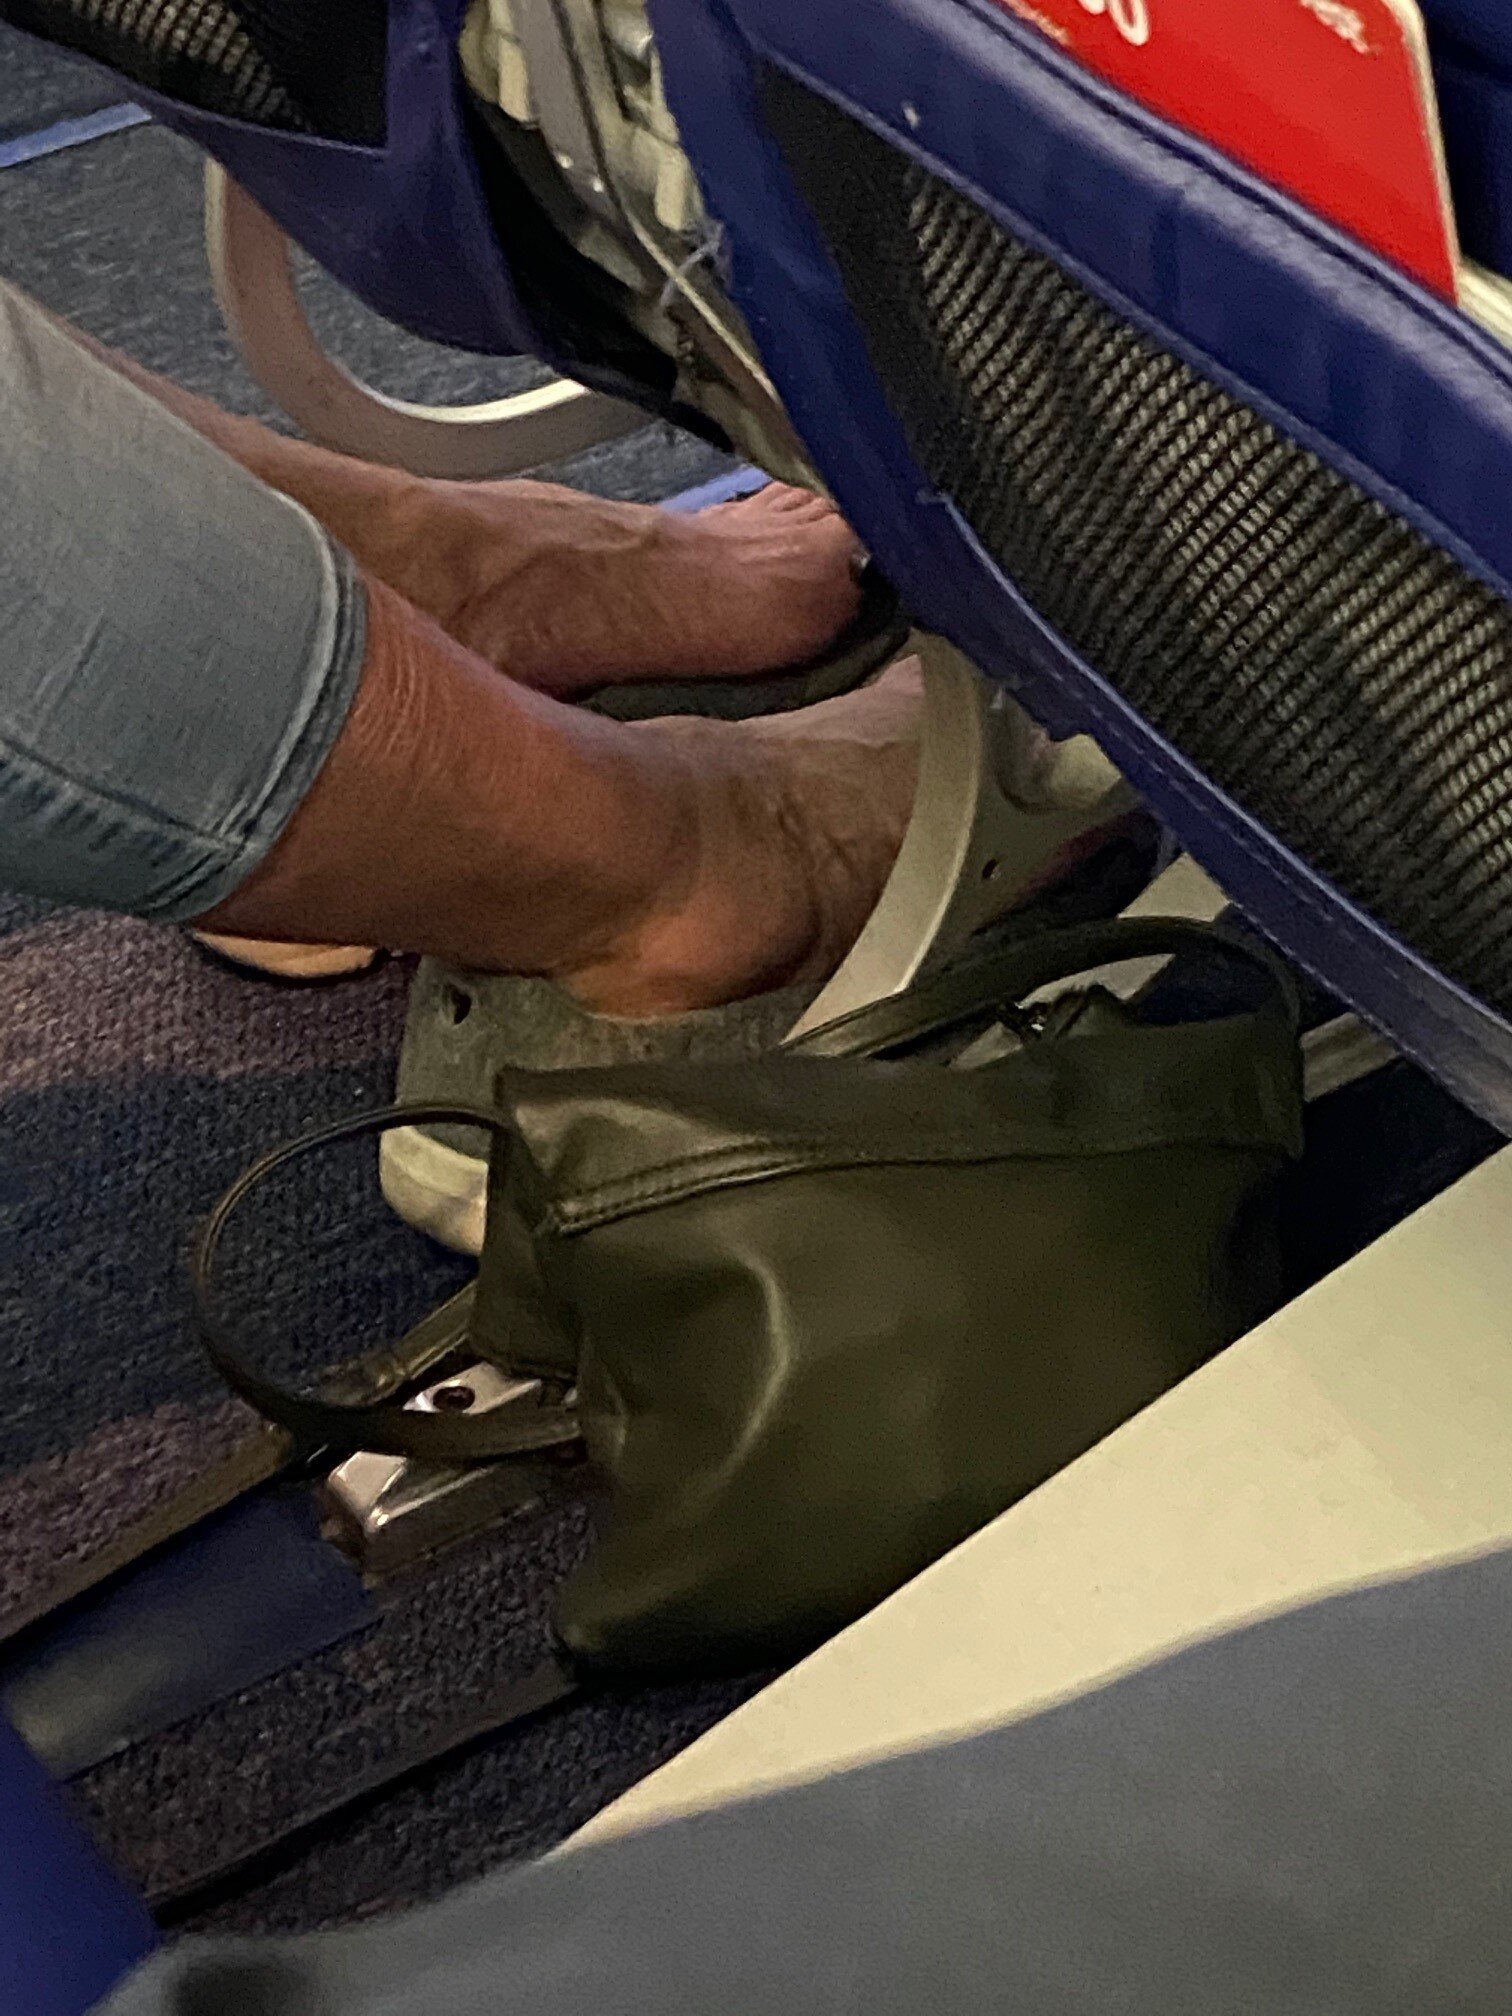 Airplane Etiquette....Please keep your shoes on 